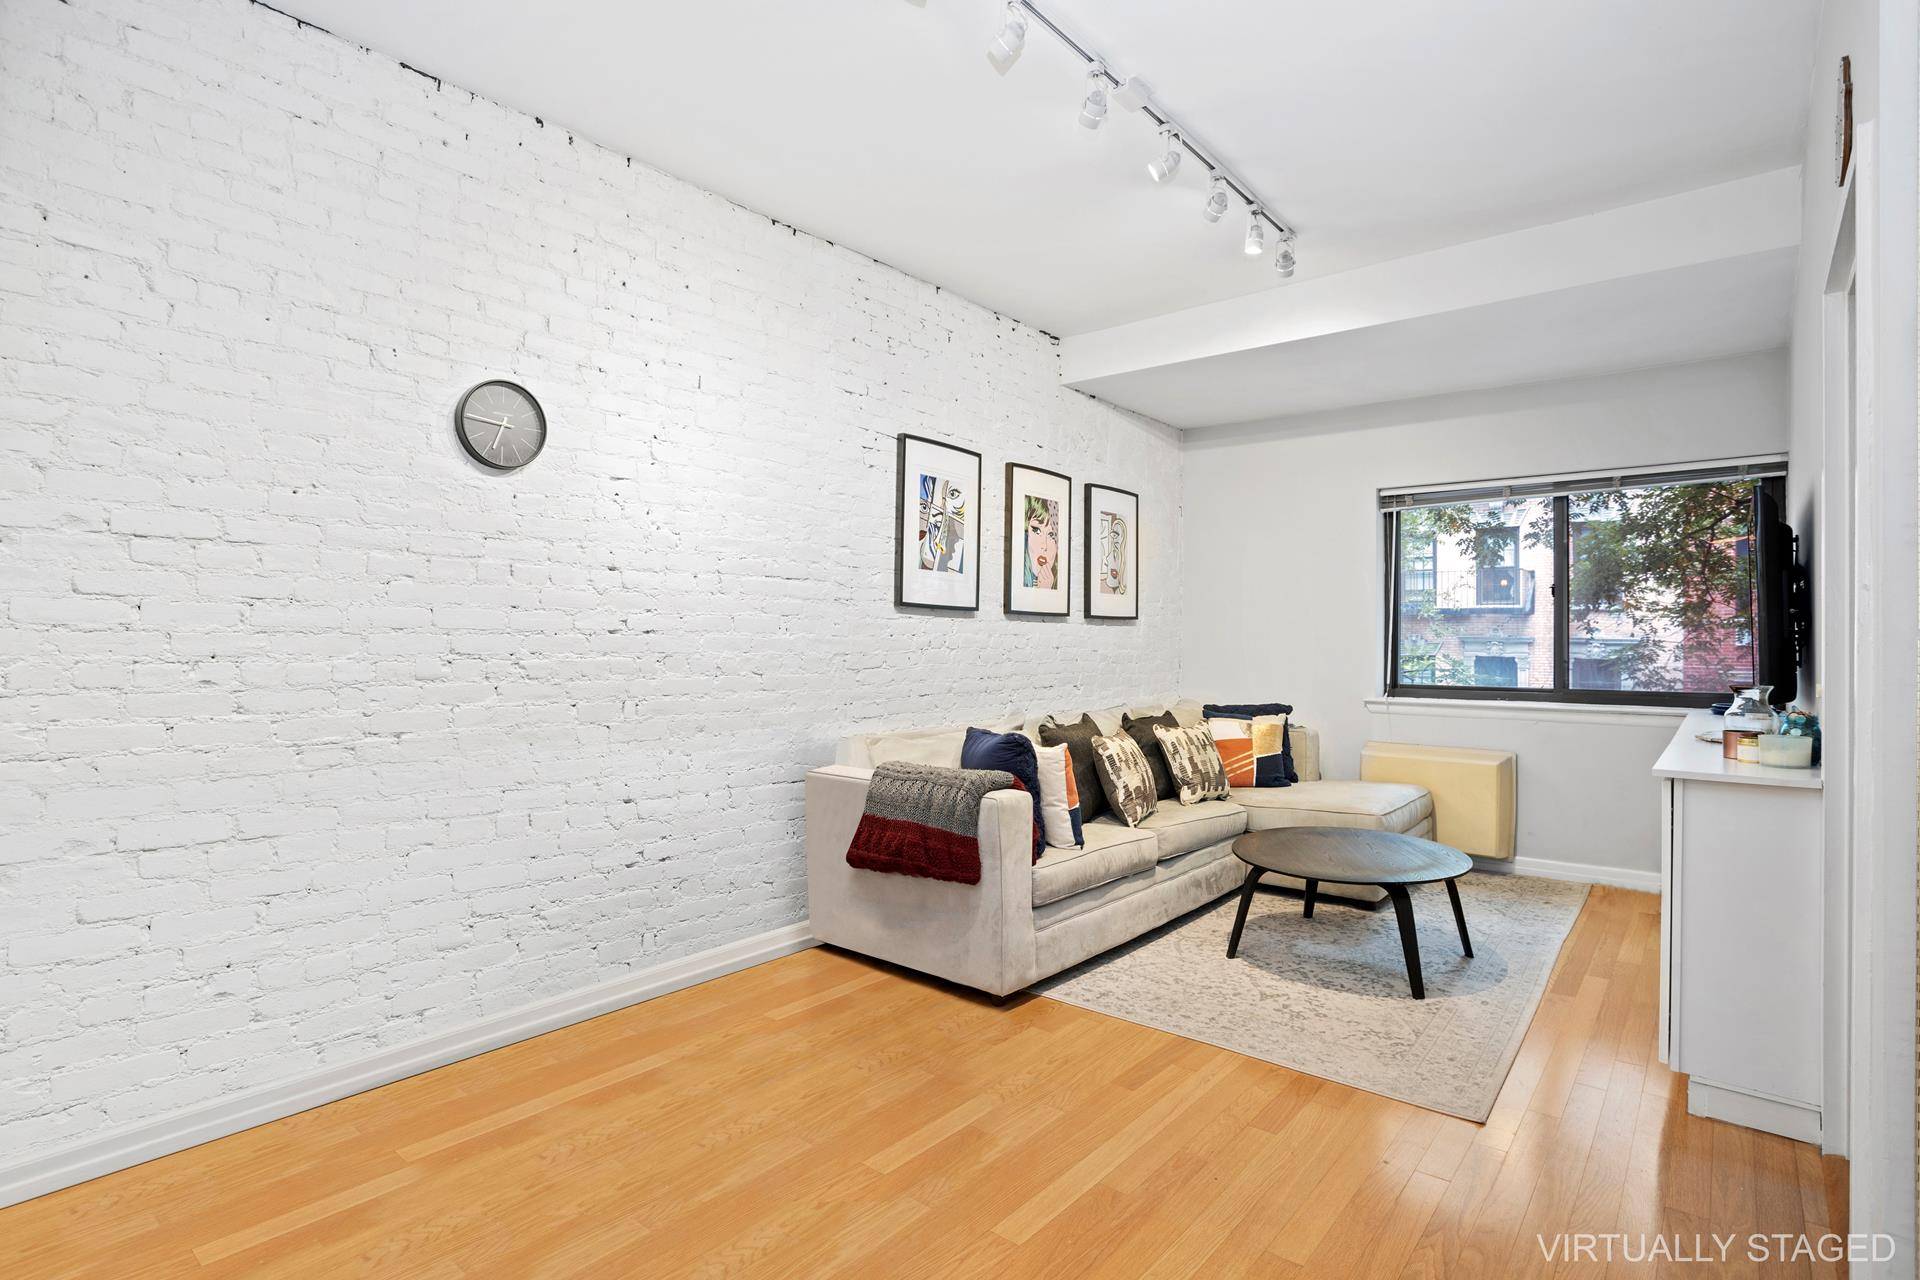 SHOWING MEMORIAL DAY WEEKEND BY APPOINTMENT, PLEASE INQUIRECharming Gramercy one bedroom for offer at Little Gramercy, a premiere building in the heart of Gramercy.